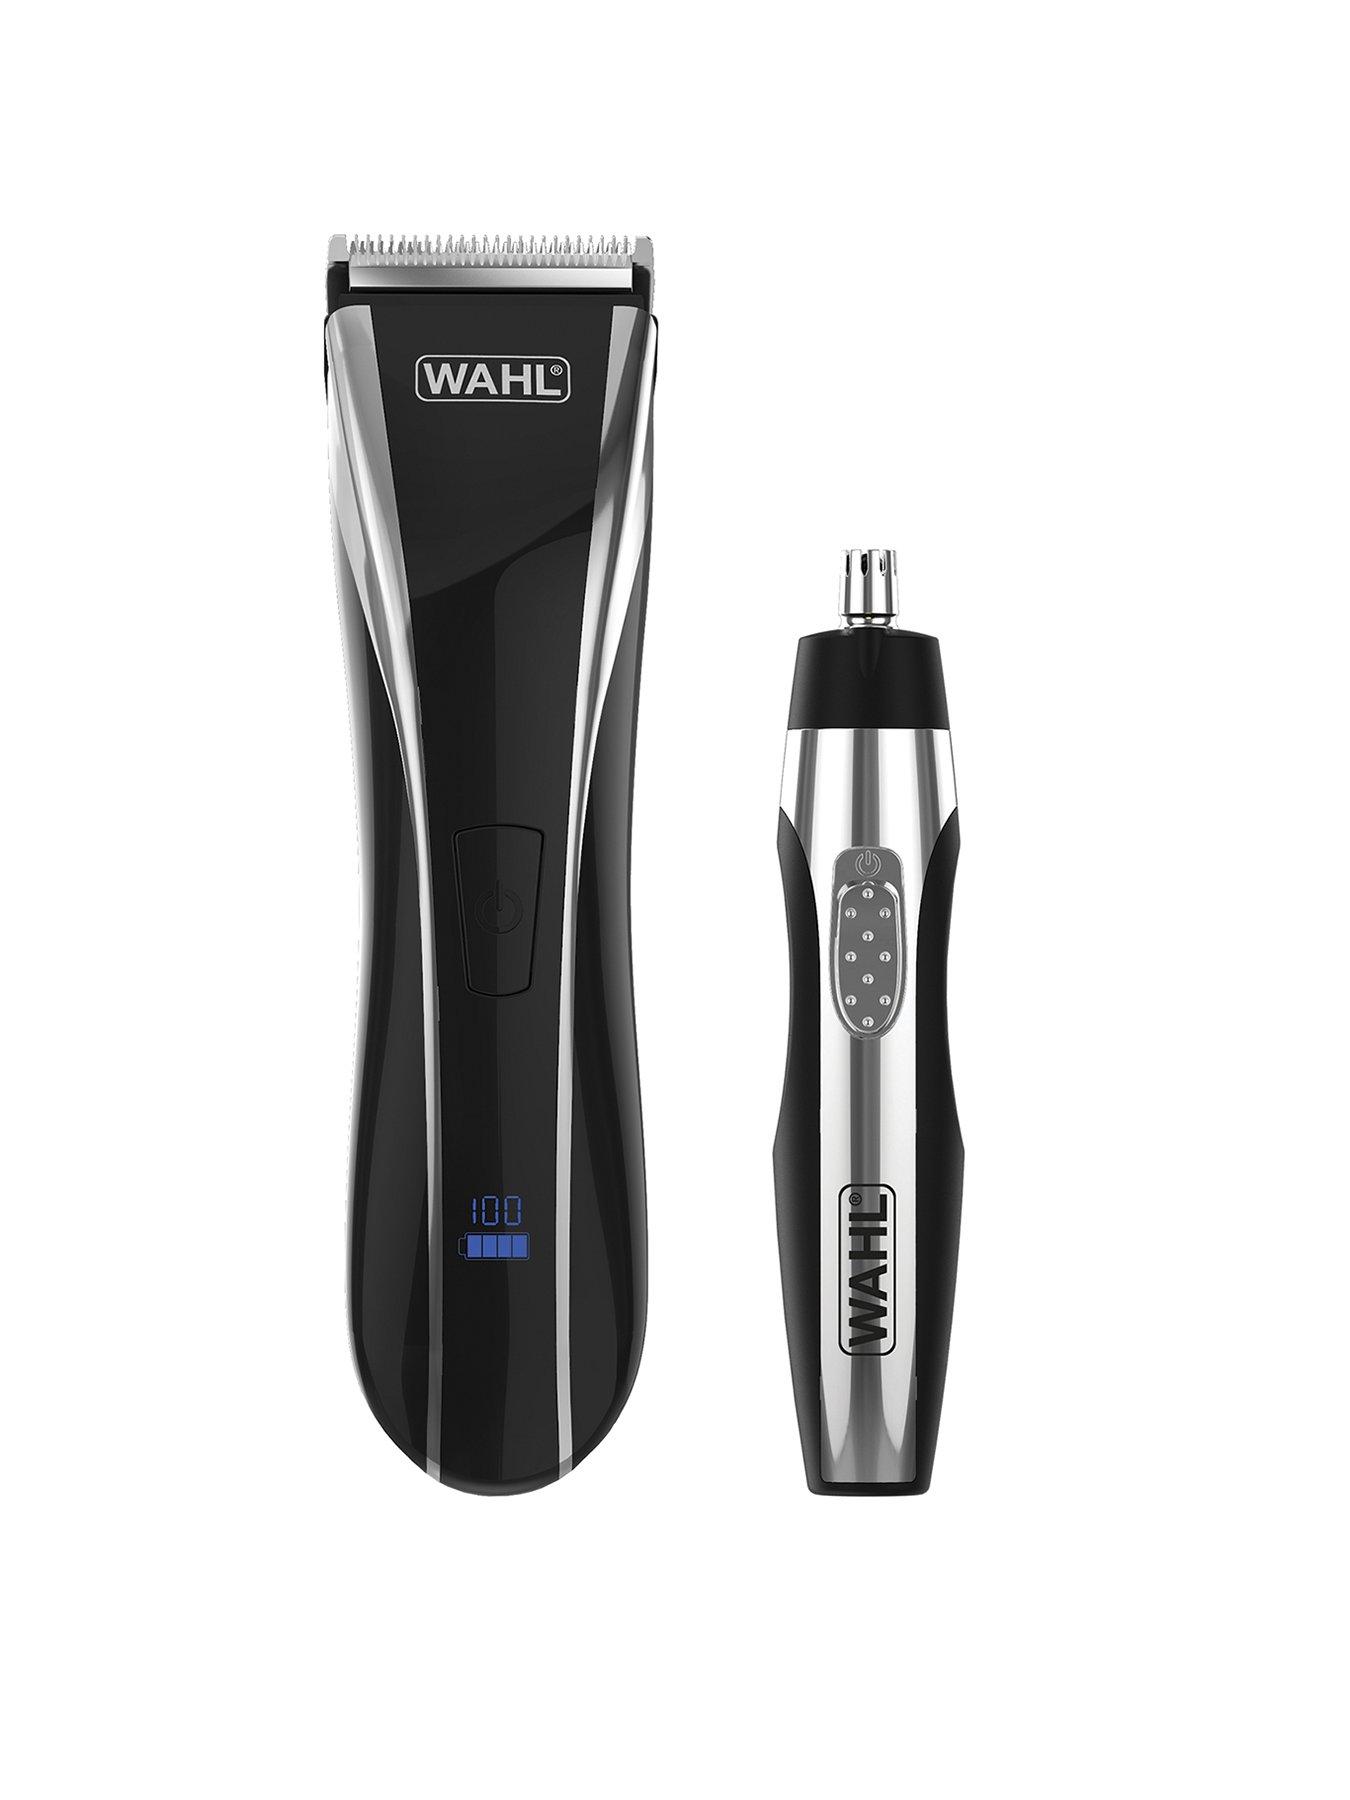 wahl cordless clippers lithium